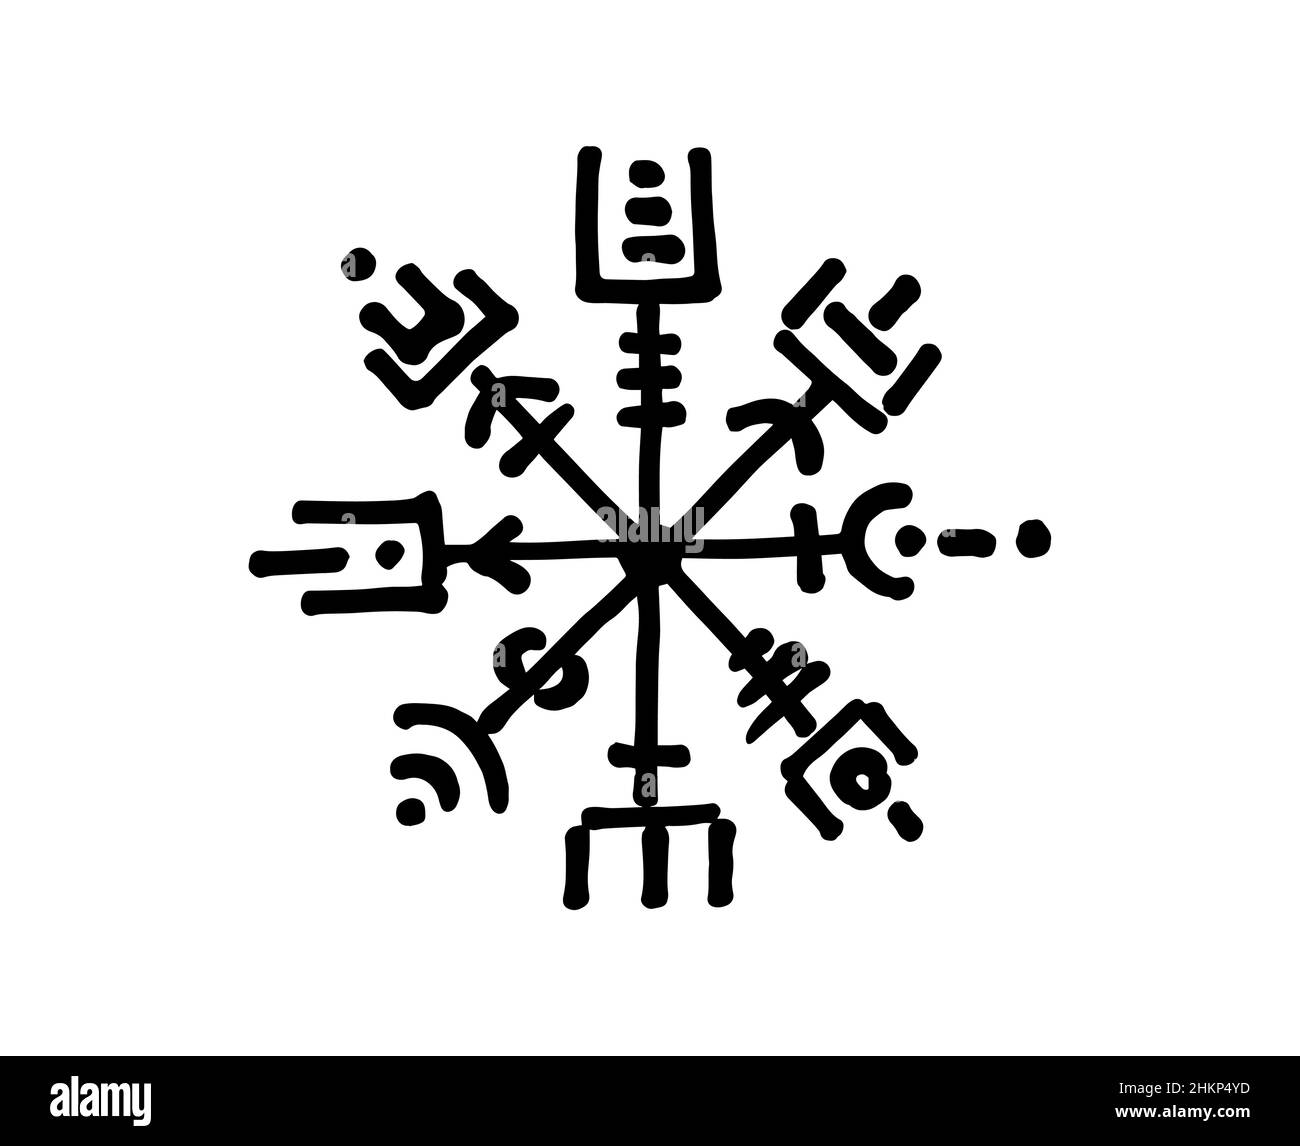 Set Of Illustrated Line Art Nordic Runes On Stone High-Res Vector